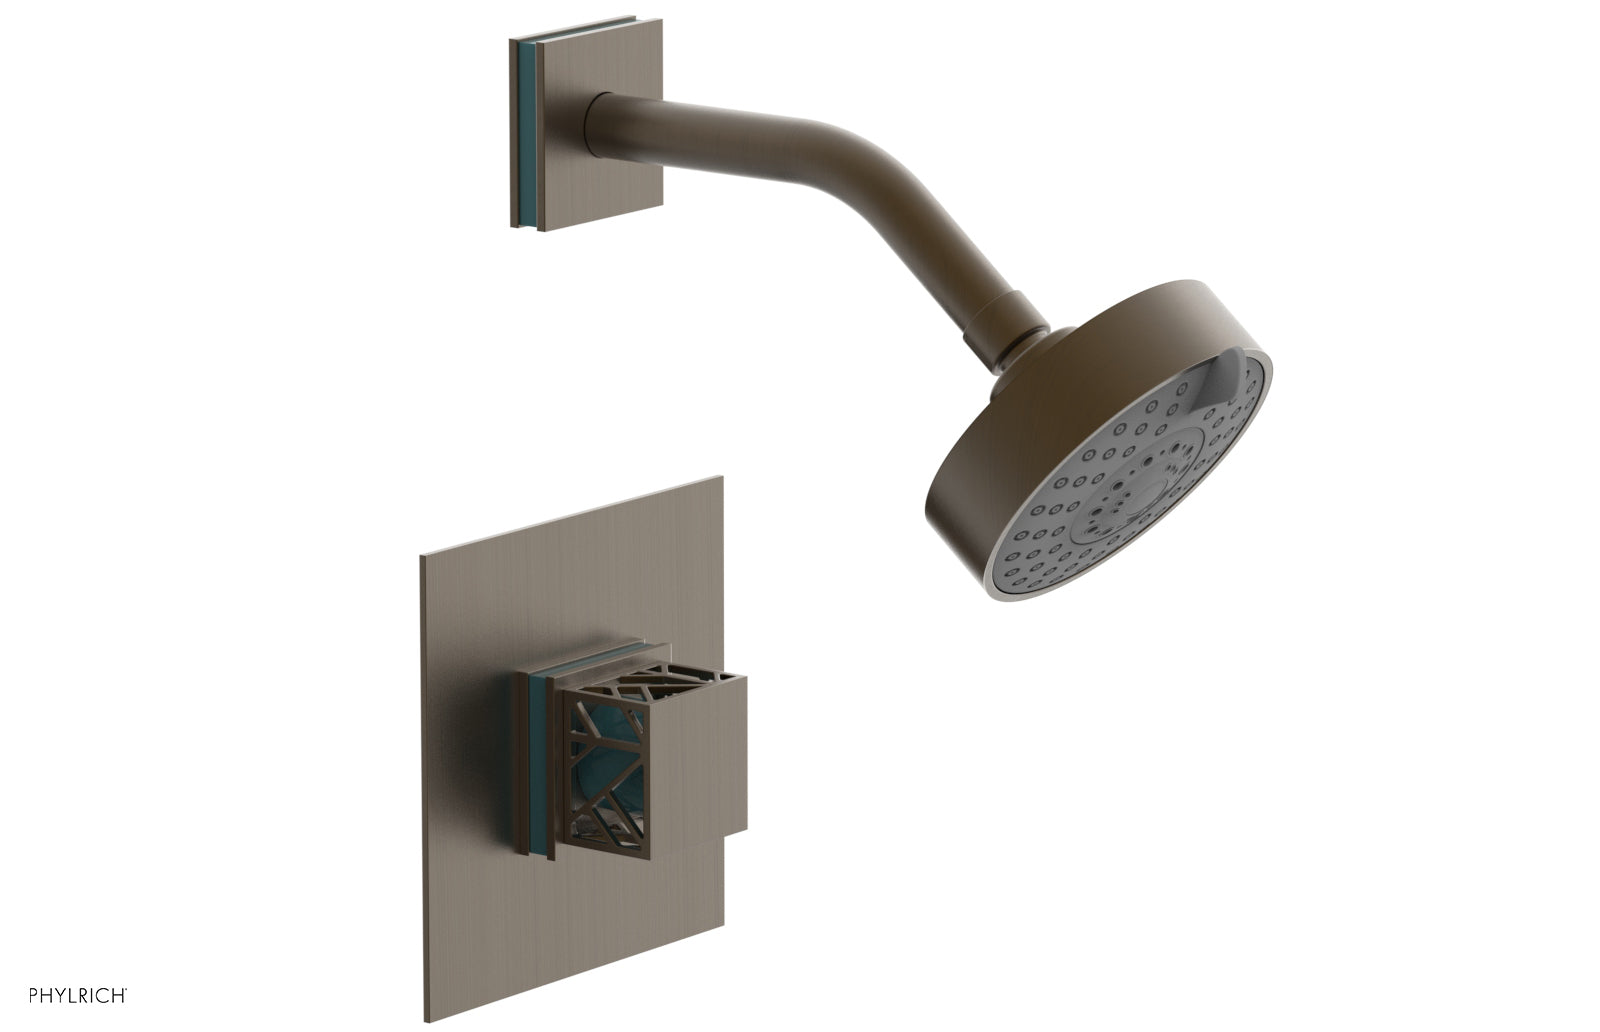 Phylrich JOLIE Pressure Balance Shower Set - Square Handle with "Turquoise" Accents